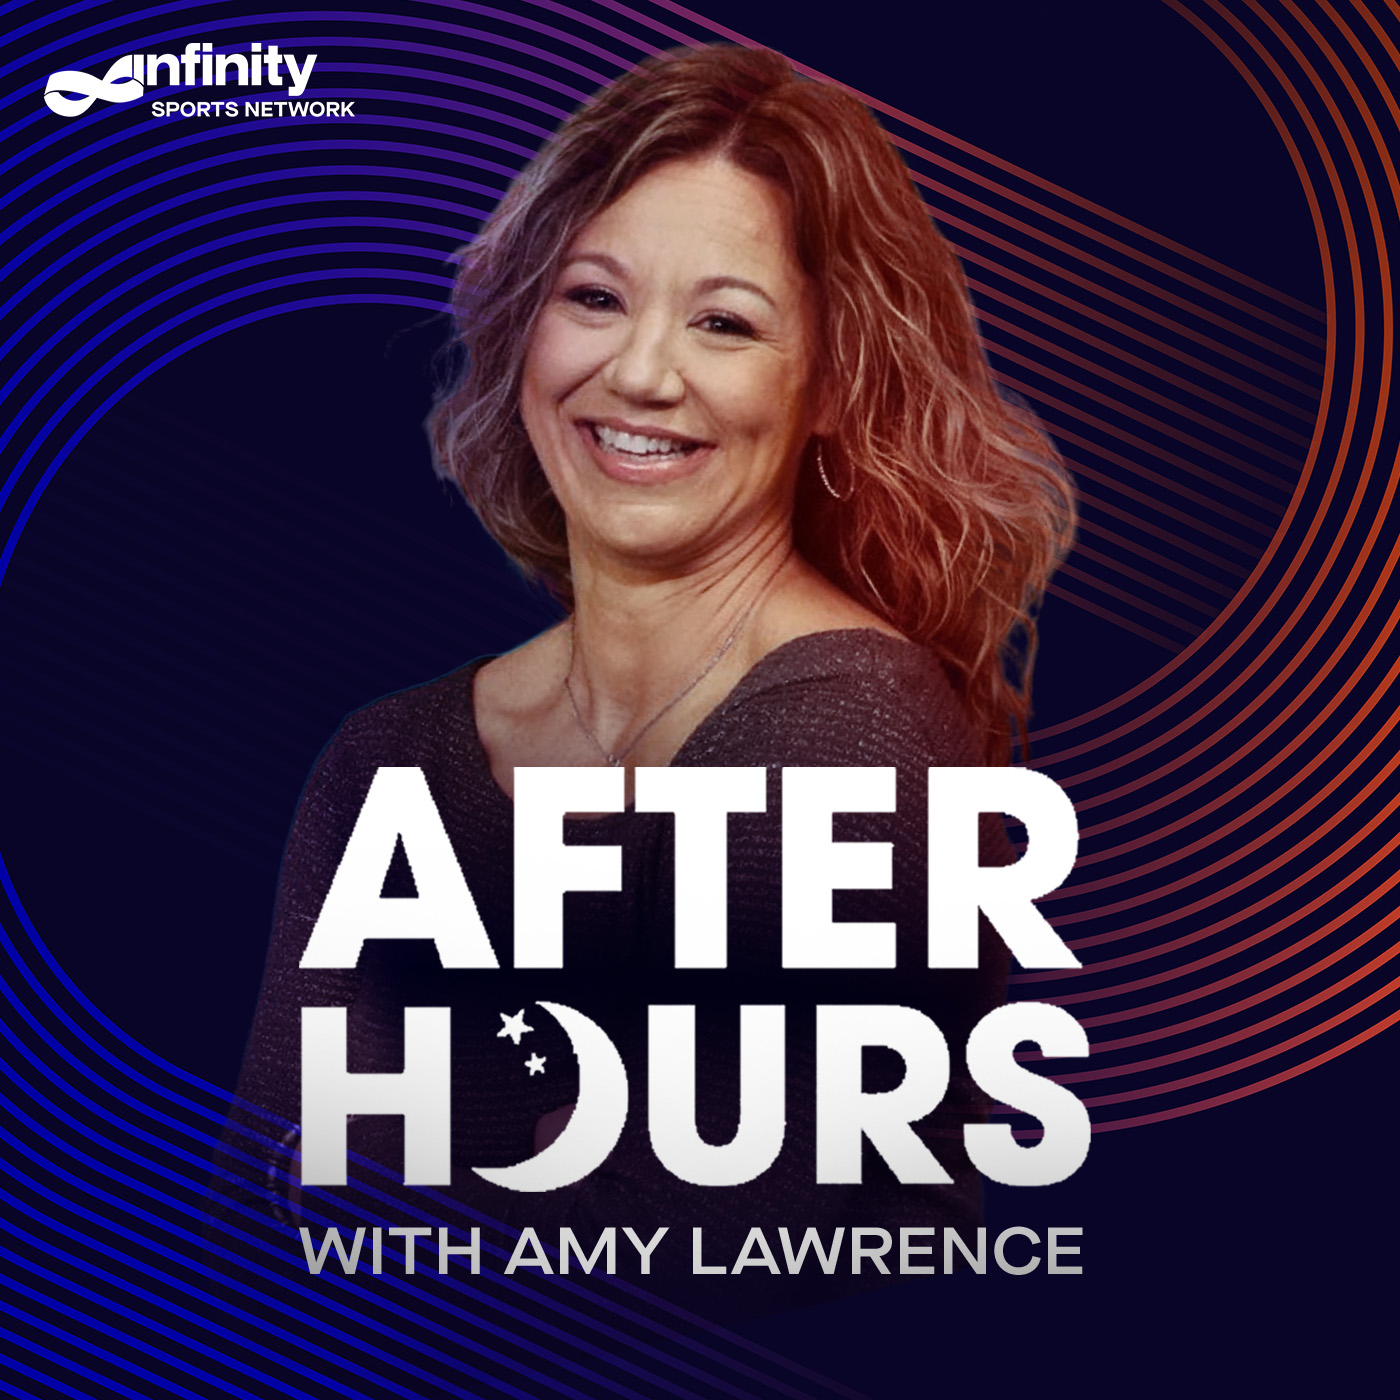 11-15-23 After Hours with Amy Lawrence PODCAST: Hour 1